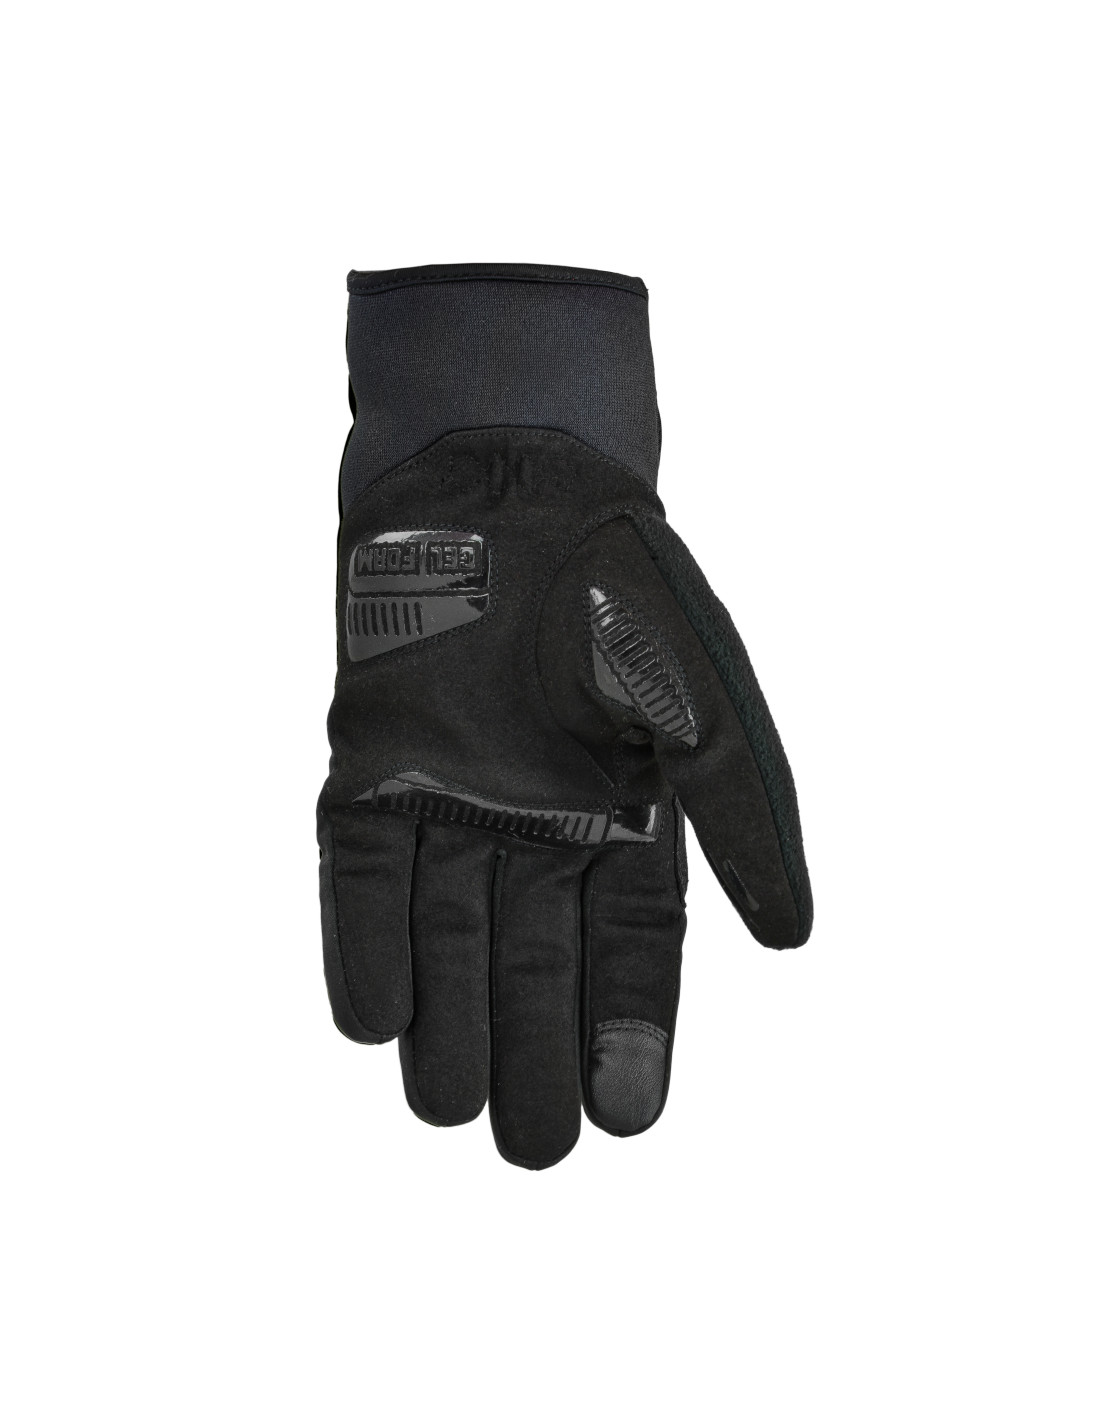 guantesgloves-climate-pad_1.jpg